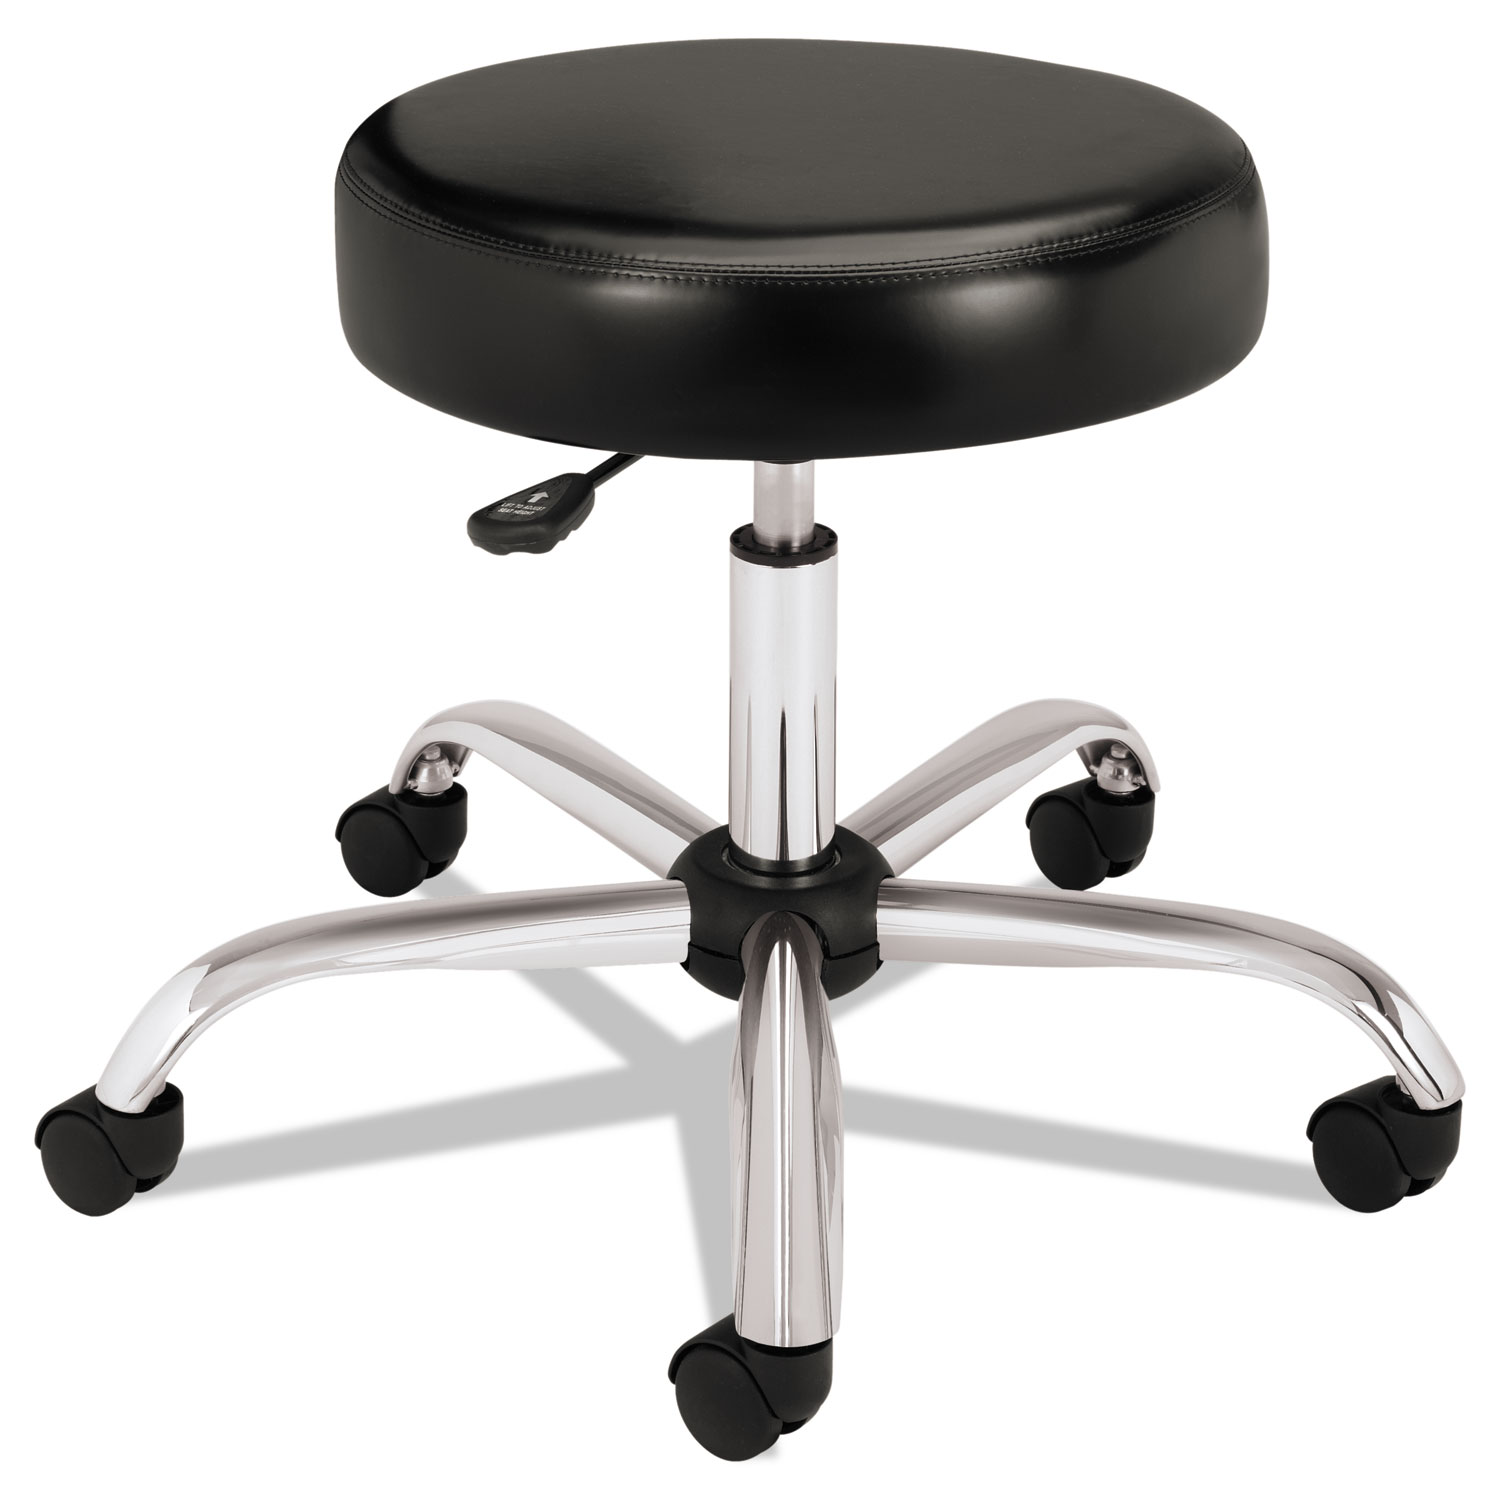  HON HMTS01.EA11 Adjustable Task/Lab Stool without Back, 22 Seat Height, Supports up to 250 lbs., Black Seat, Steel Base (HONMTS01EA11) 